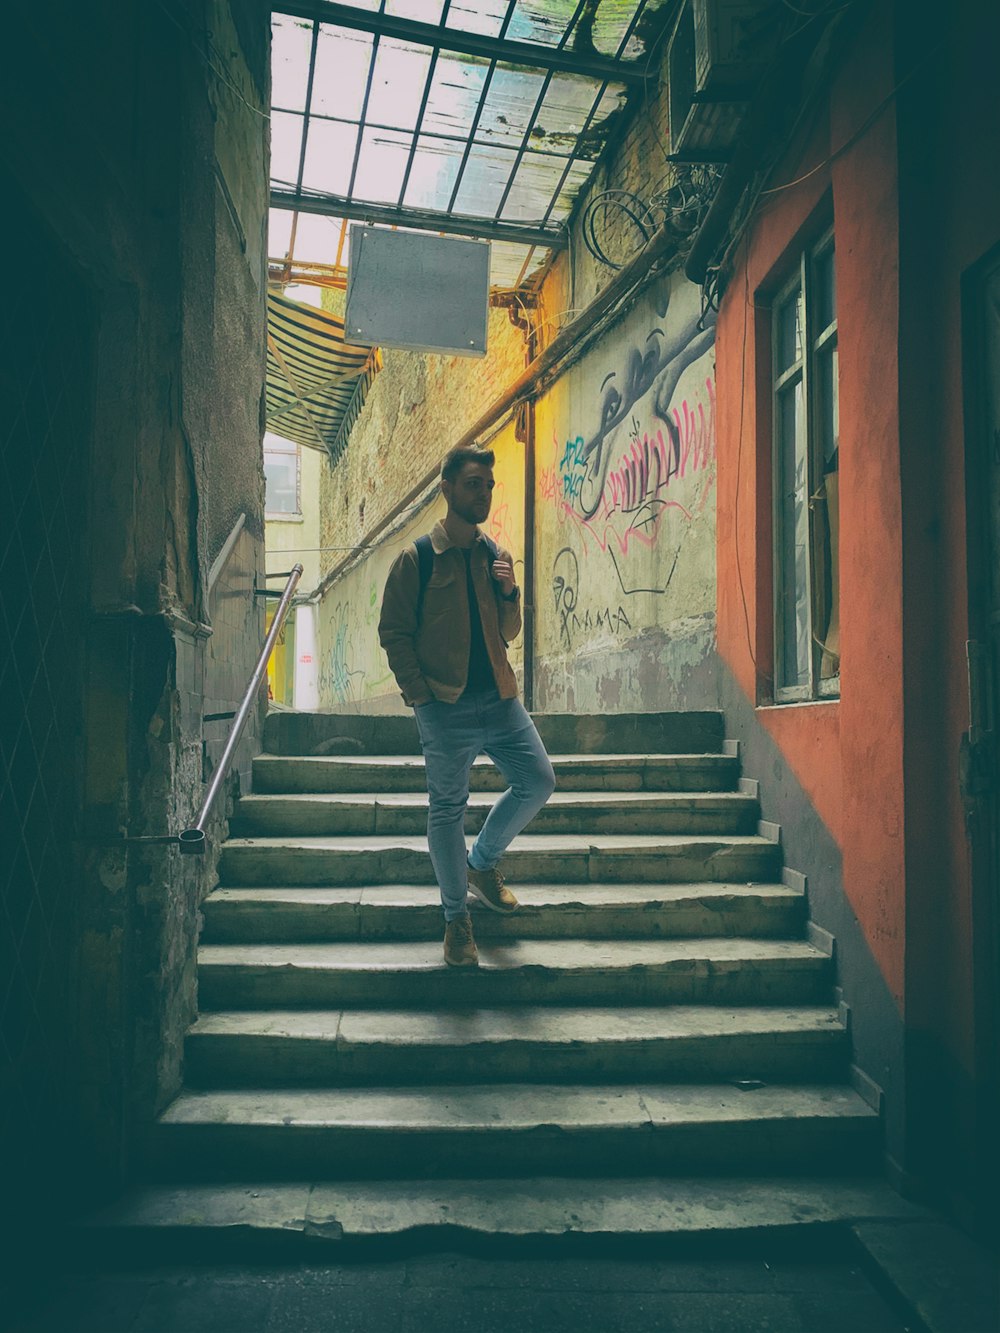 Man On Stairs Pictures  Download Free Images on Unsplash